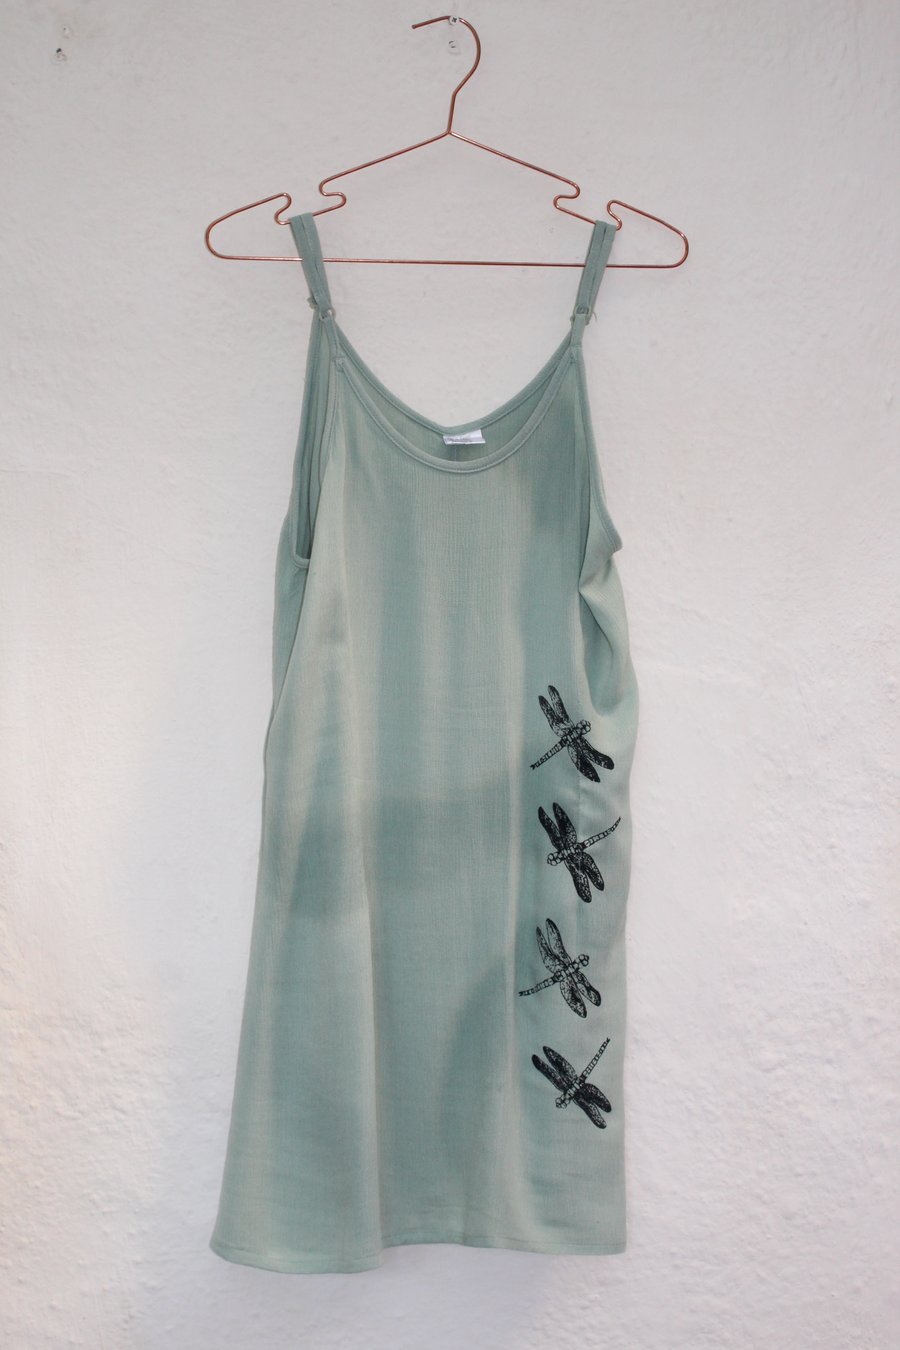 Vintage 90's Ladies dragonfly hand print Dress,Re worked Summer  dress,up cycled